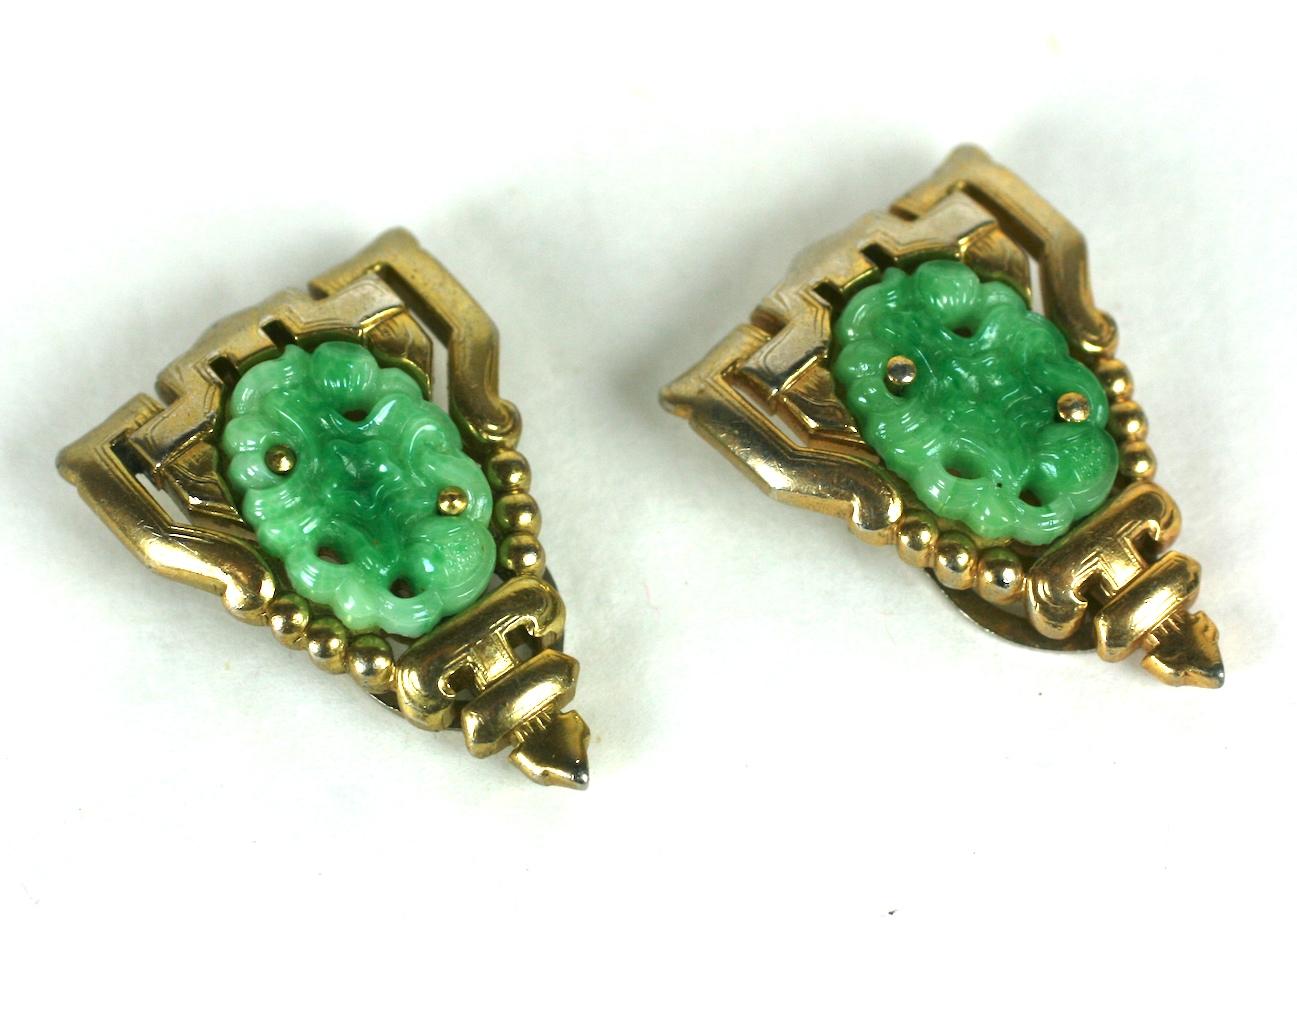 Trifari Ming Series Faux Jade Clips from the mid 1930's. Early unsigned TKF designs with signature Trifari clip back fittings.
1.3